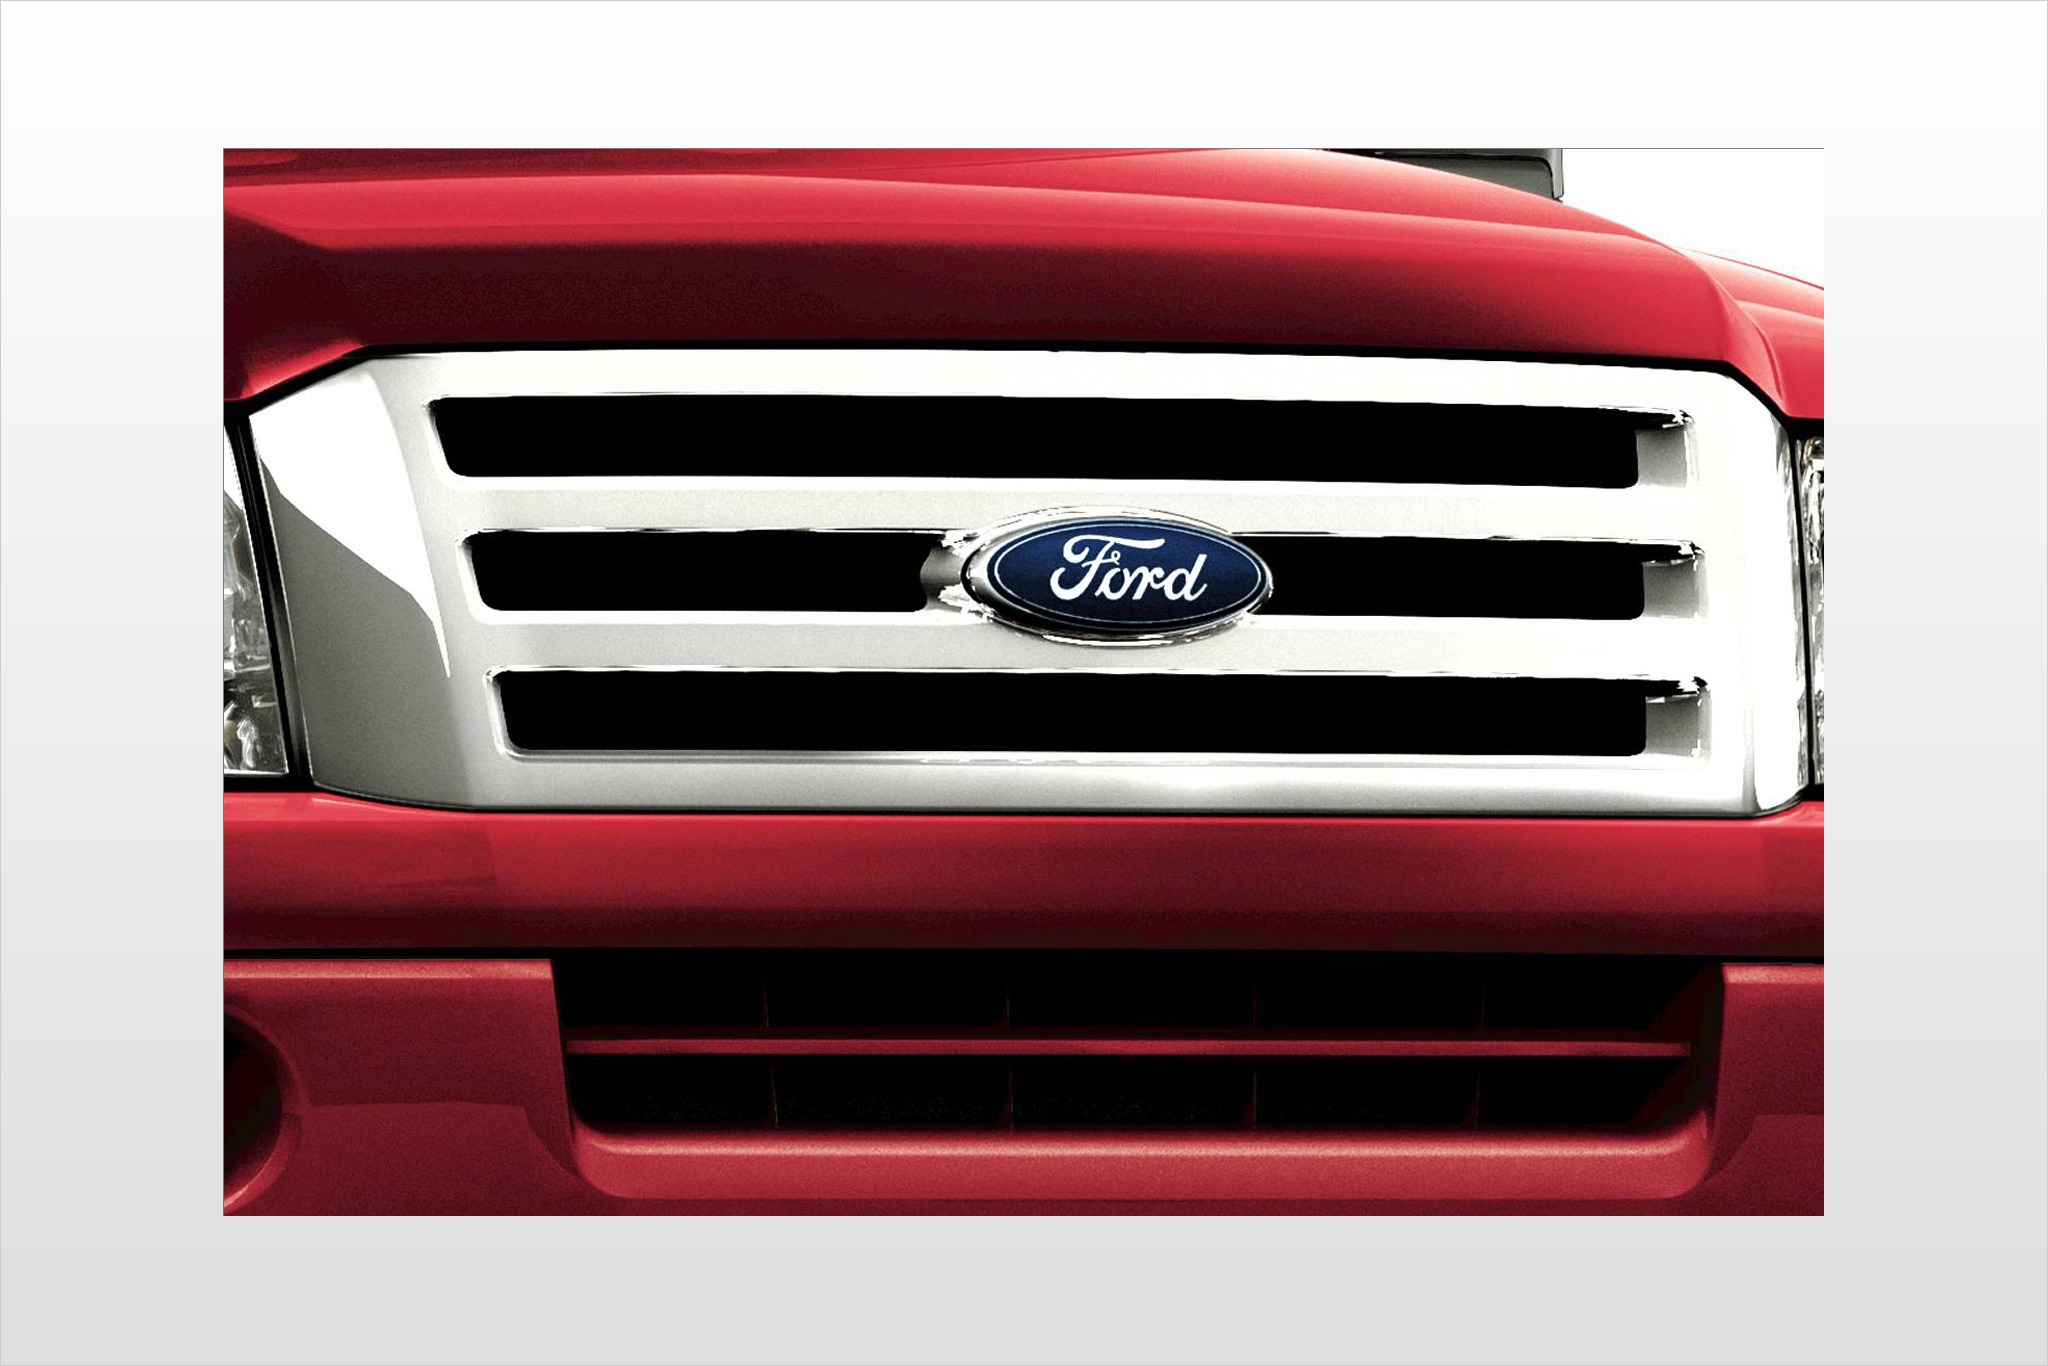 2010 Ford Expedition XLT 4dr SUV Front Badge